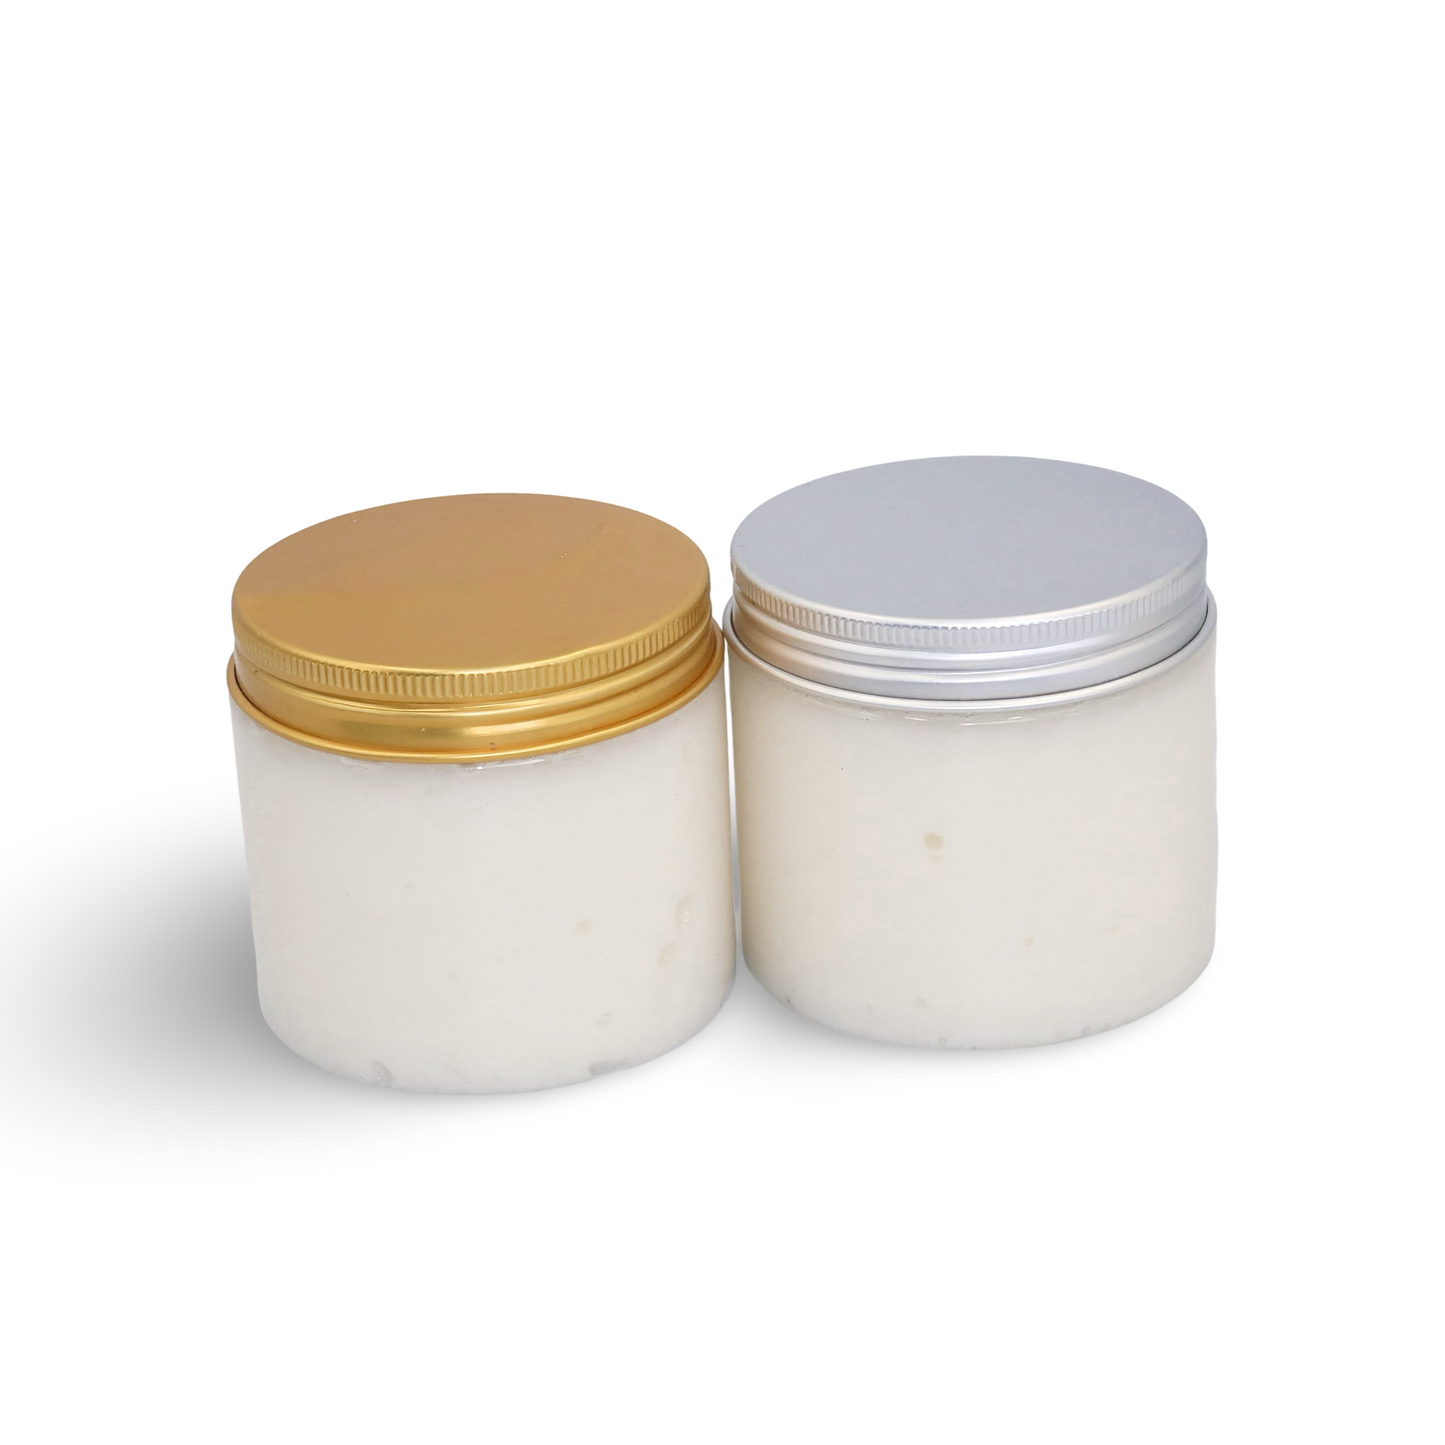 Whipped shea body butter for clear and glowing skin enriched with licorice root and niacinamide